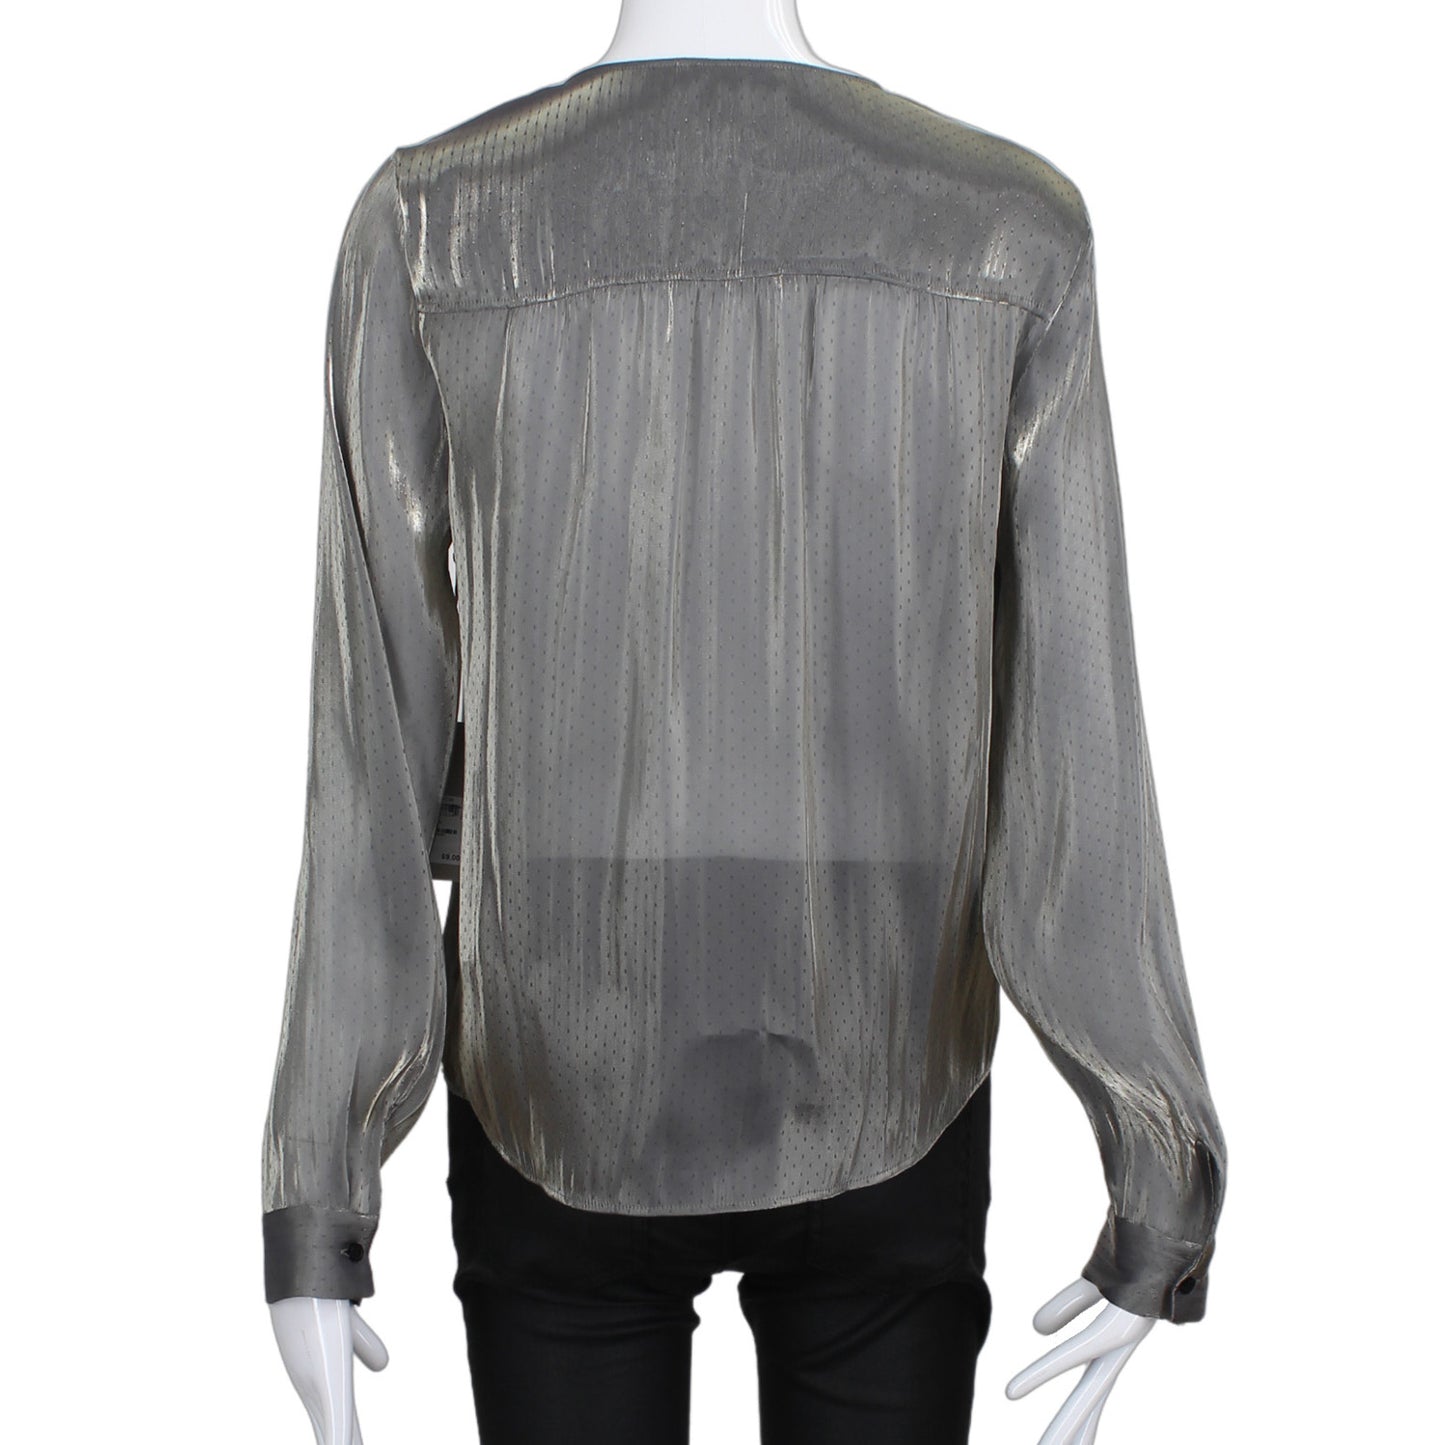 CHELSEA 28 GREY/GOLD SHEER BLOUSE SZ MD